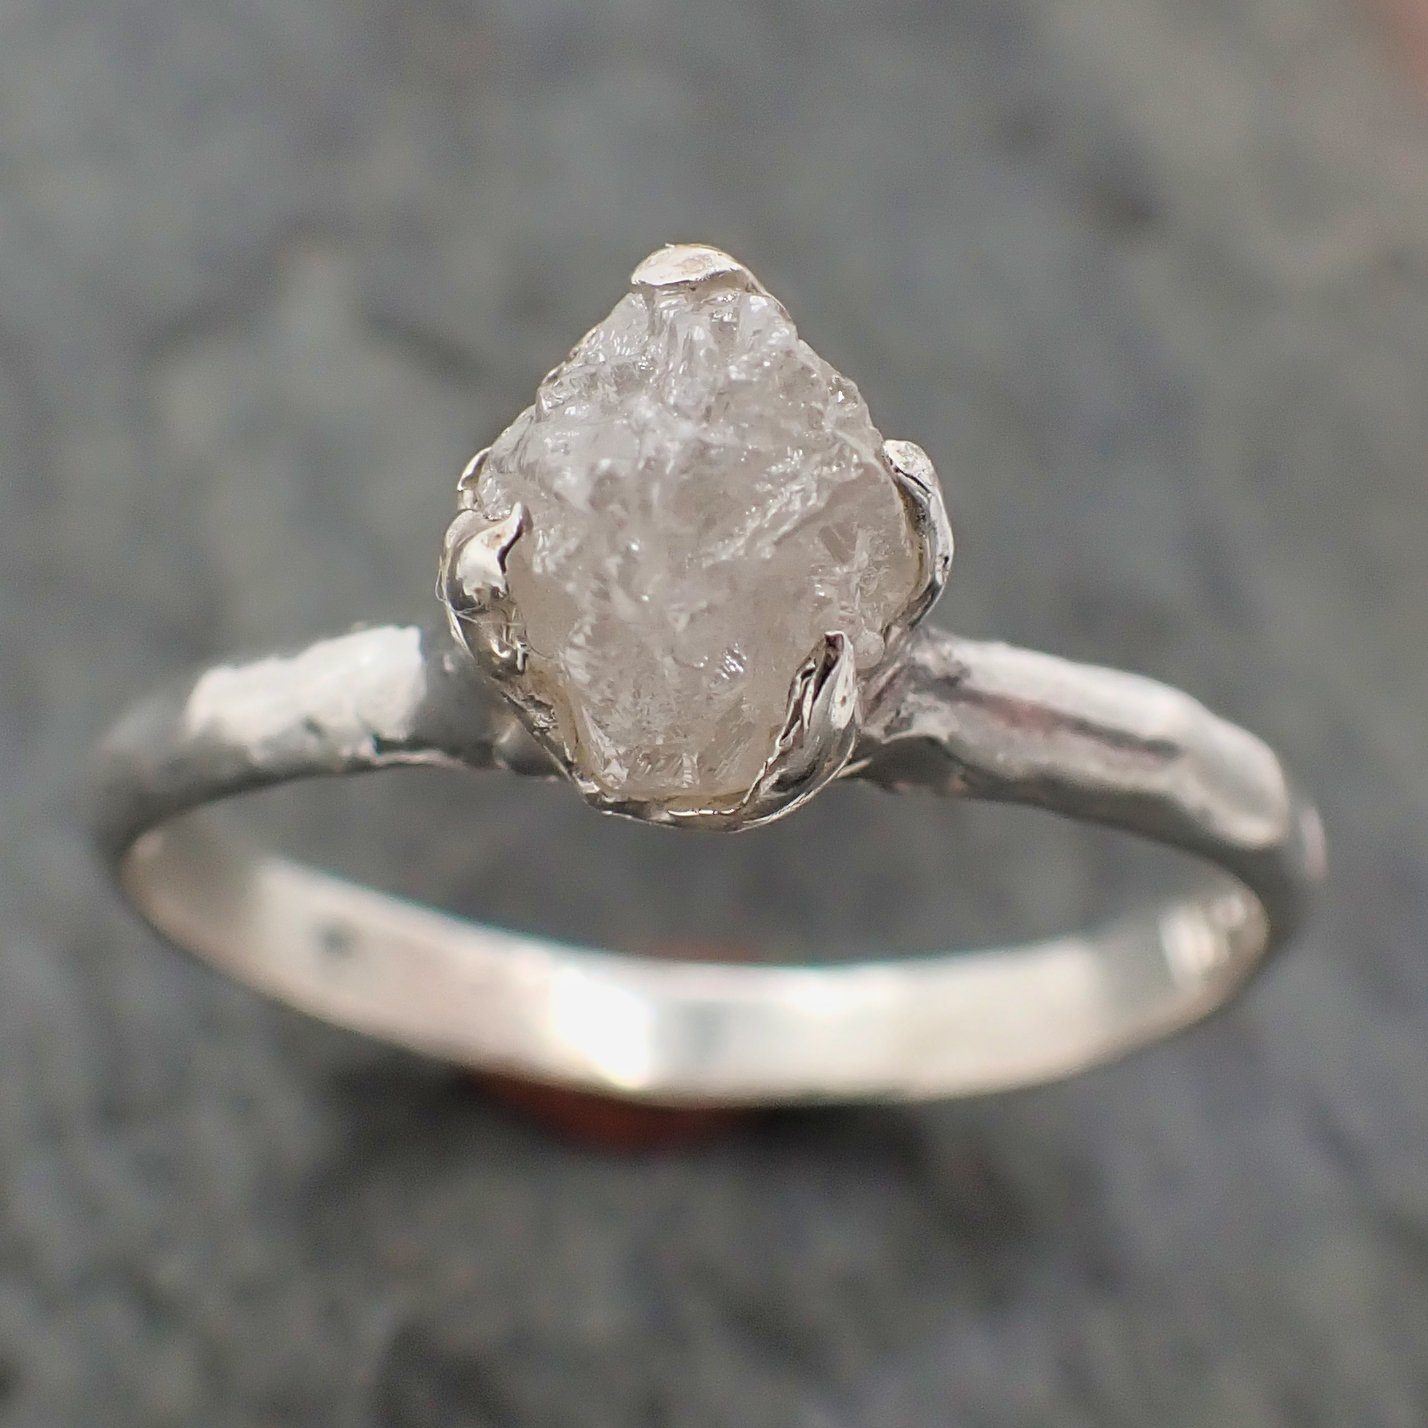 raw rough diamond engagement stacking ring solitaire silver ring recycled ss00049 Alternative Engagement